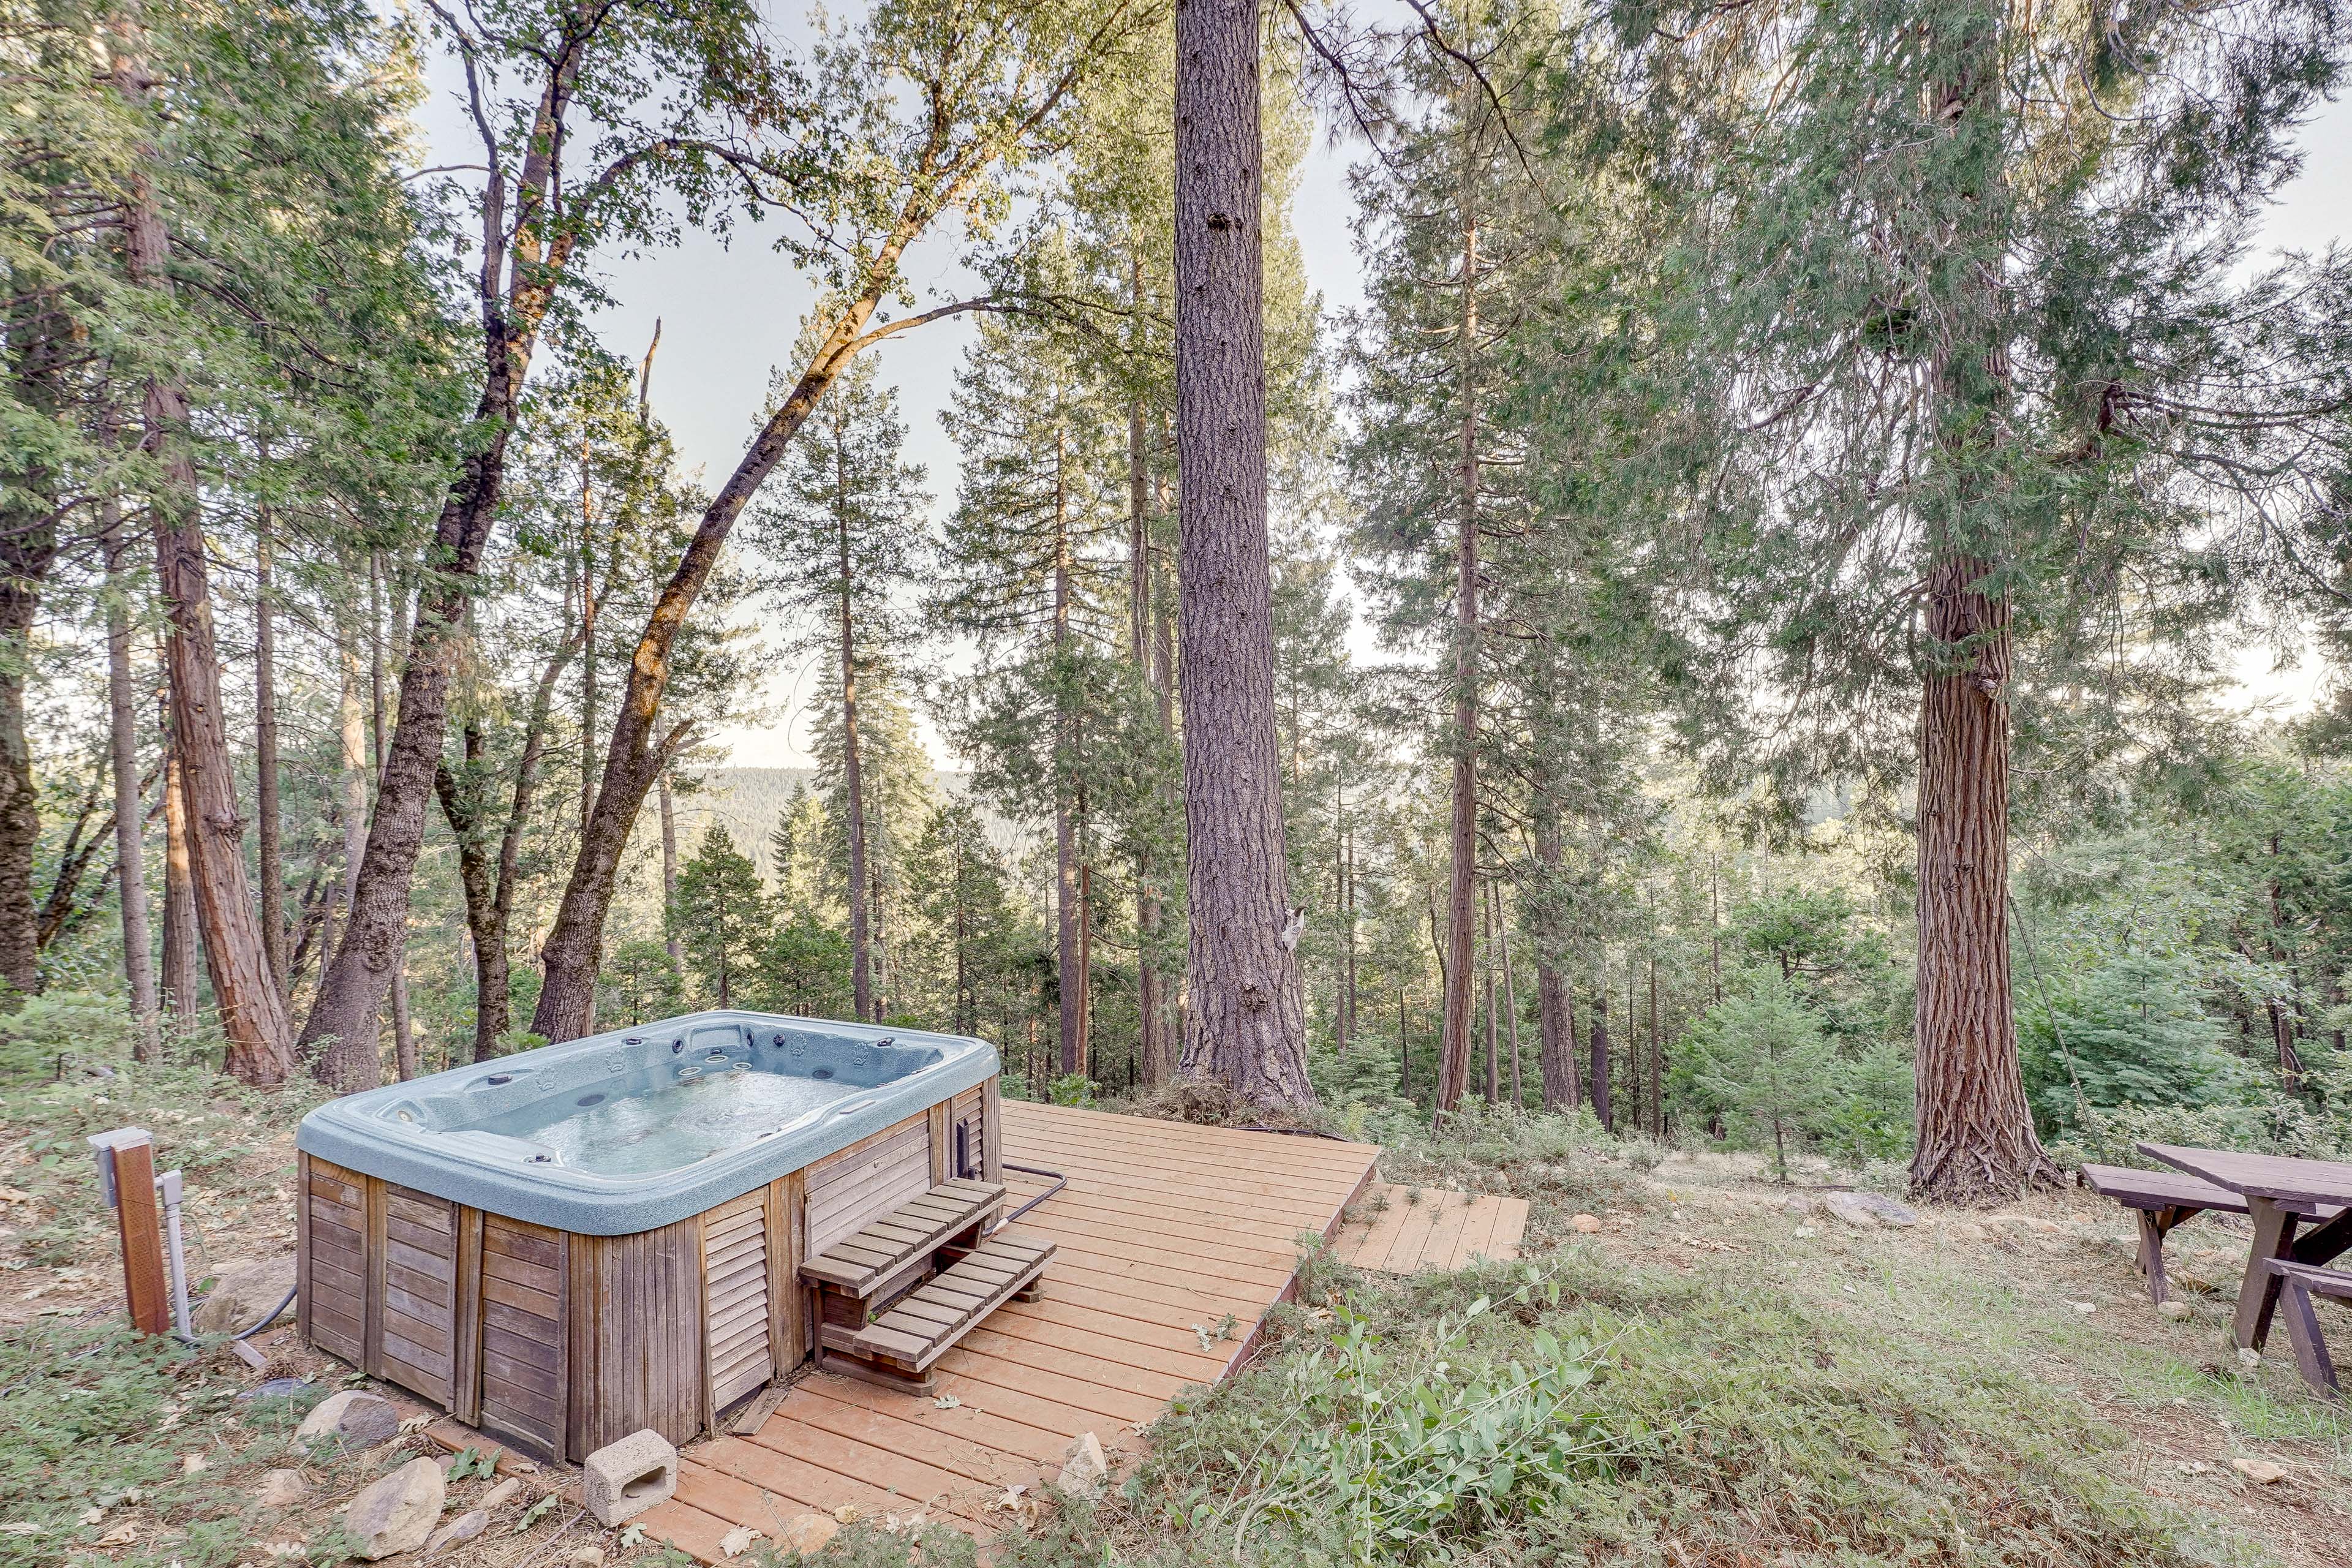 Nevada City Vacation Rental | 2BR | 1BA | 1,200 Sq Ft | 3 Steps to Enter